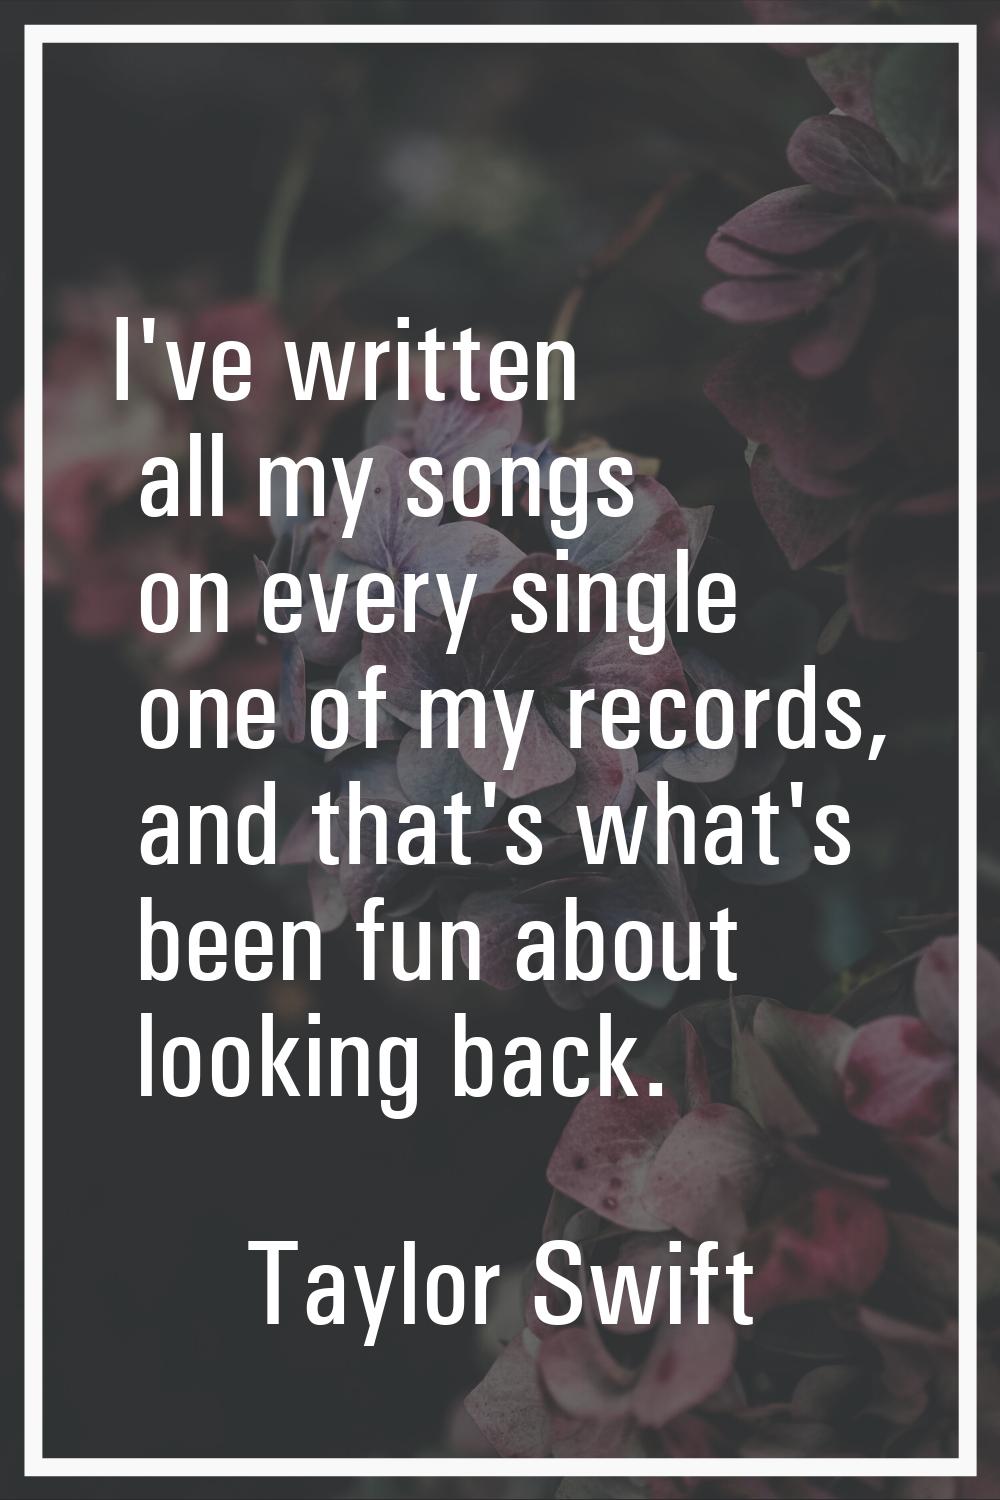 I've written all my songs on every single one of my records, and that's what's been fun about looki